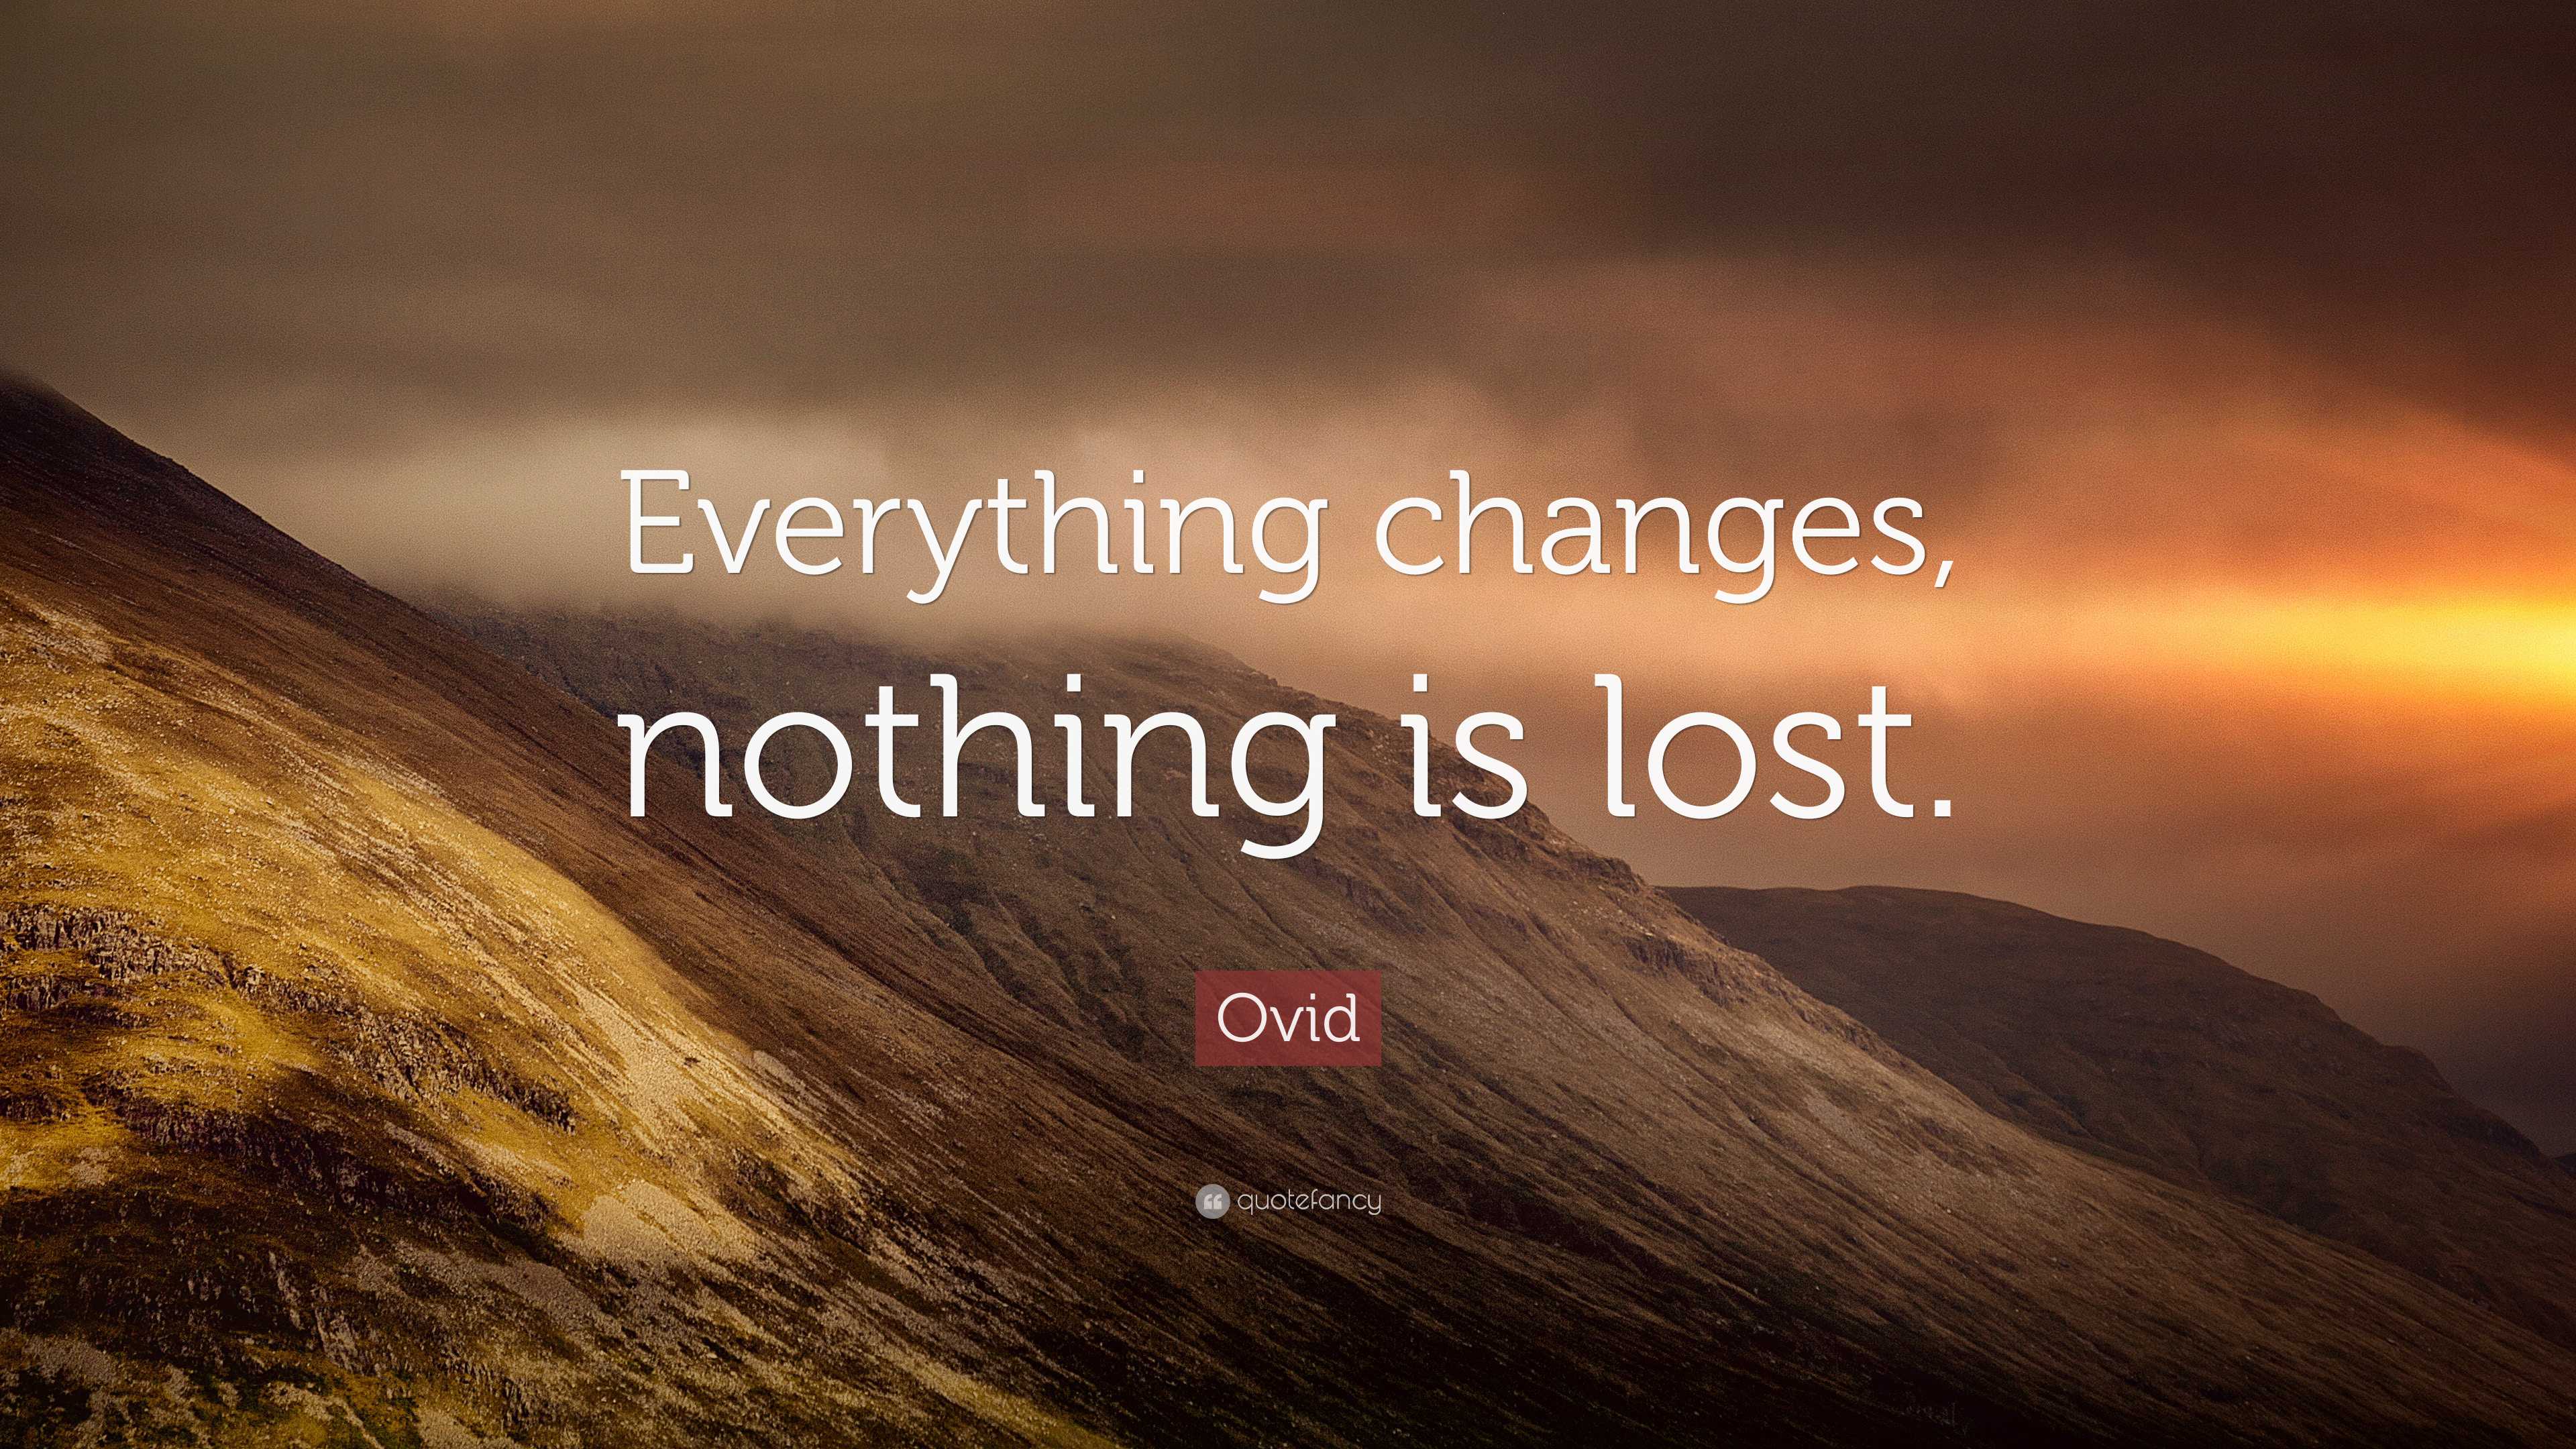 Ovid Quote: “Everything changes, nothing is lost.”